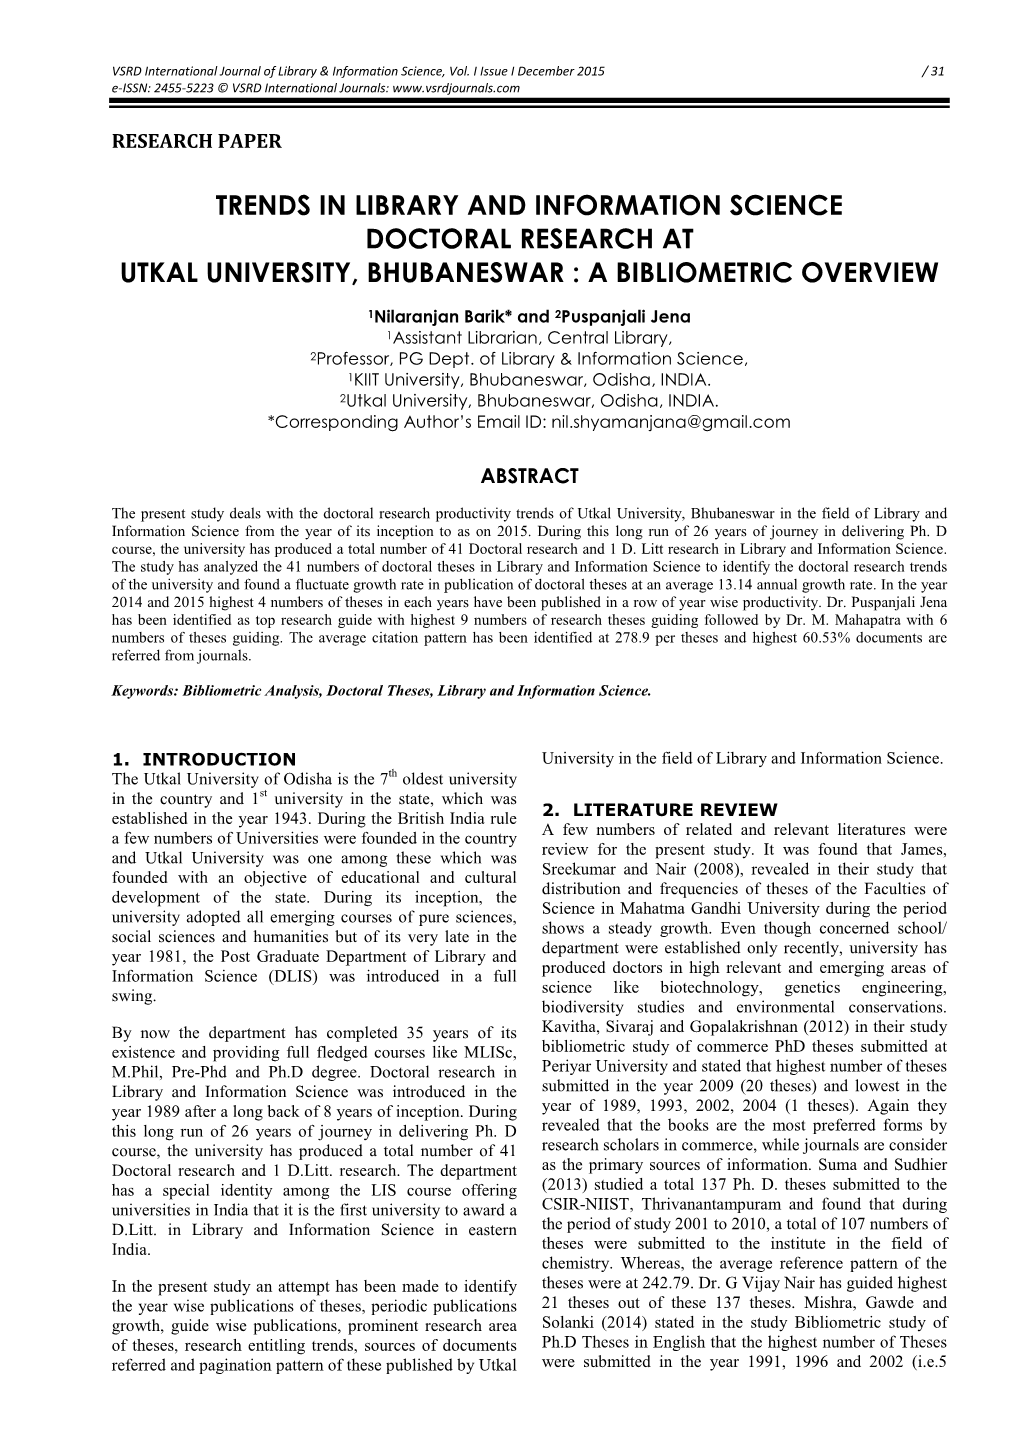 Trends in Library and Information Science Doctoral Research at Utkal University, Bhubaneswar : a Bibliometric Overview